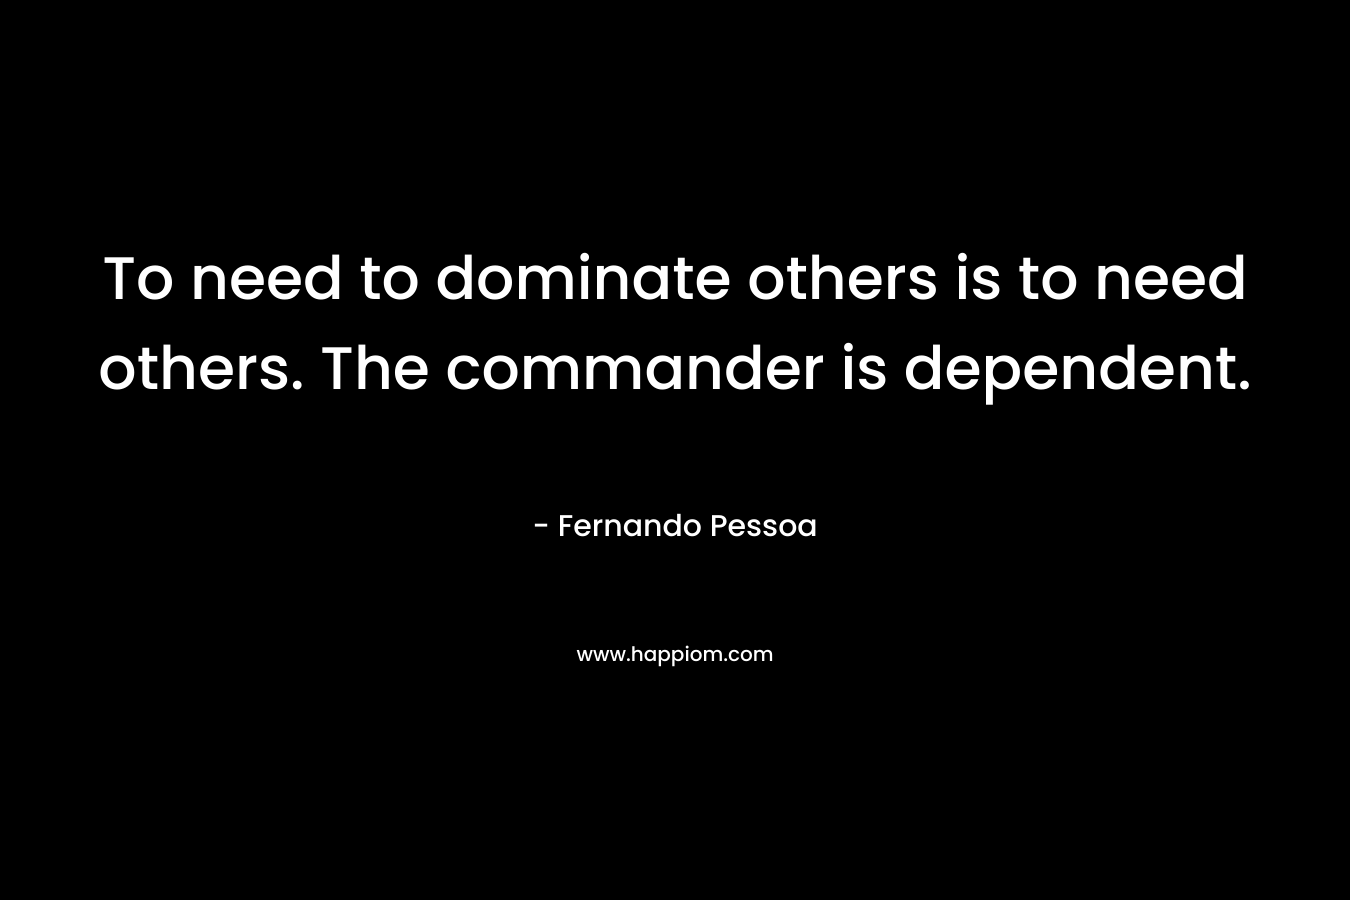 To need to dominate others is to need others. The commander is dependent.